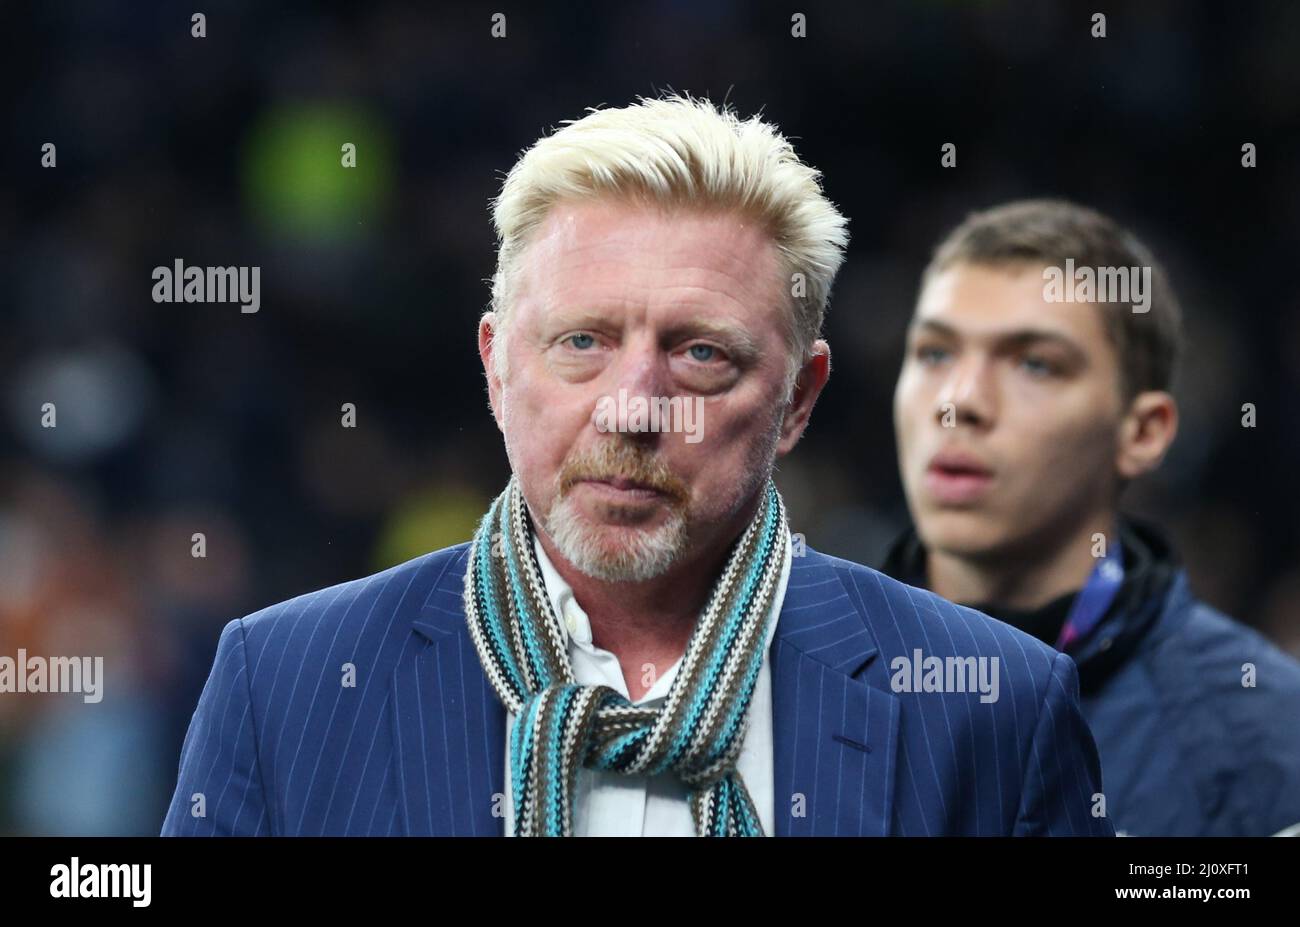 File photo dated 1/10/2019 of former Grand Slam tennis champion Boris Becker who is due to stand trial at Southwark Crown Court on Monday accused of failing to hand over his trophies to settle debts. The 54-year-old commentator, who was declared bankrupt in June 2017, is alleged to have not complied with obligations to disclose information. Issue date: Monday March 21, 2022. Stock Photo